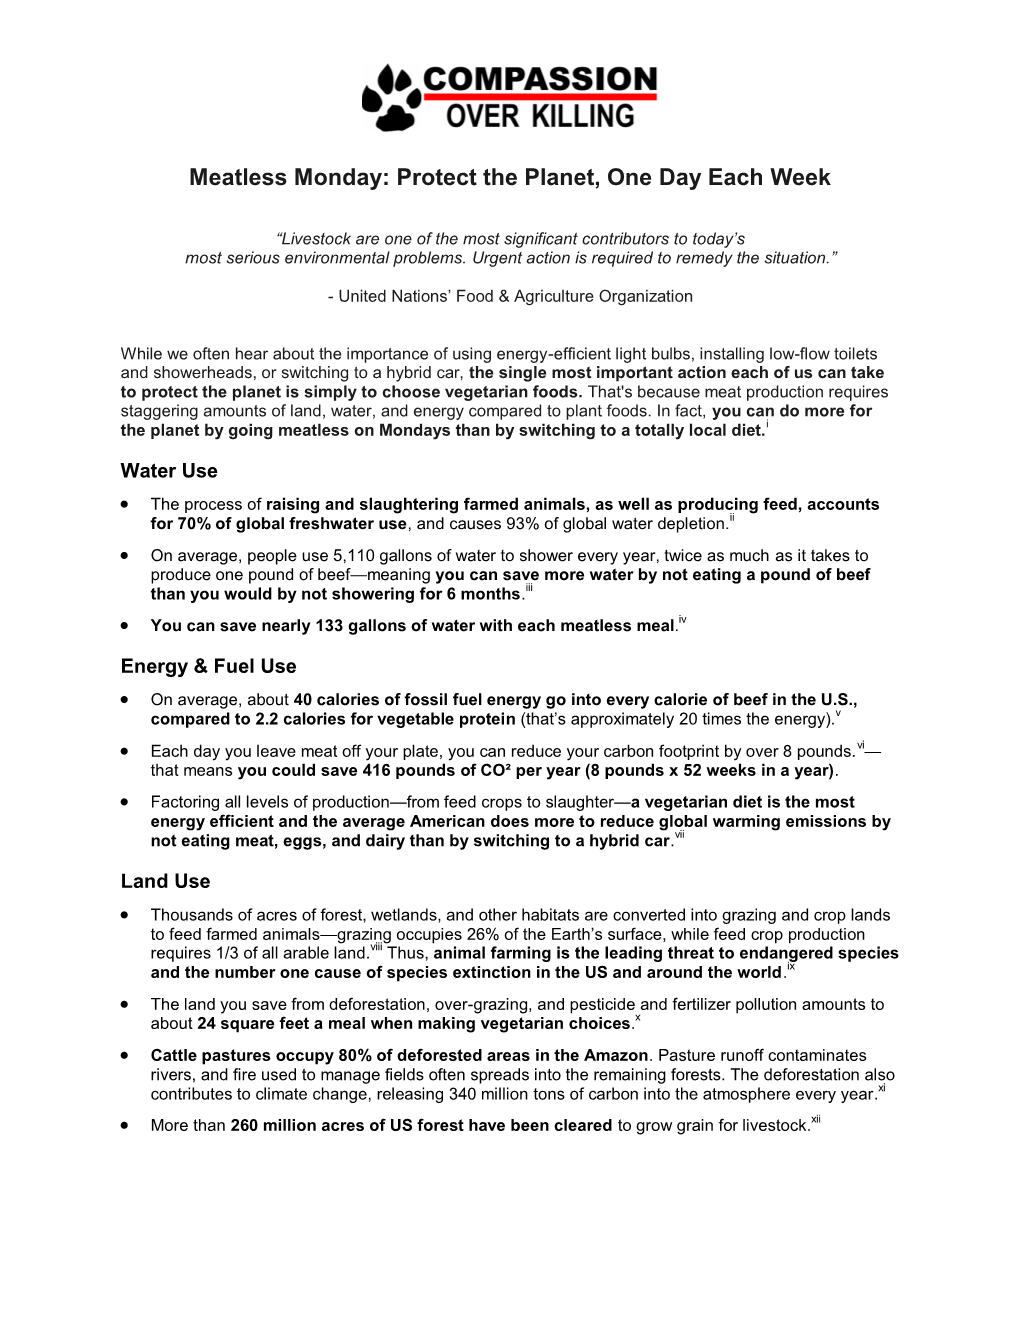 Meatless Monday: Protect the Planet, One Day Each Week